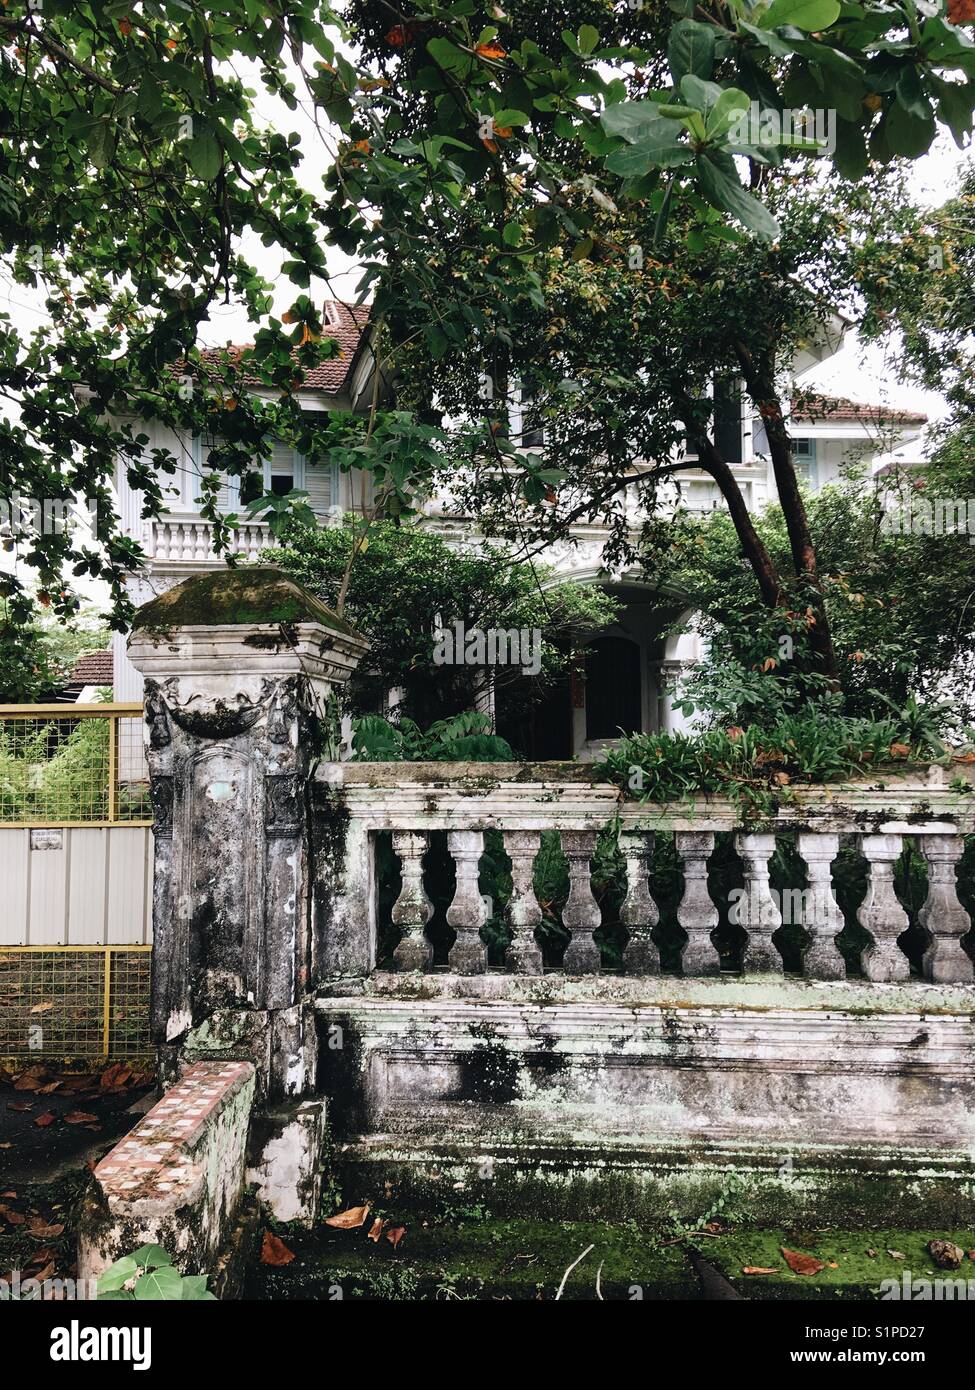 old house in a colonial style surrounded by unleashed greenery Stock Photo